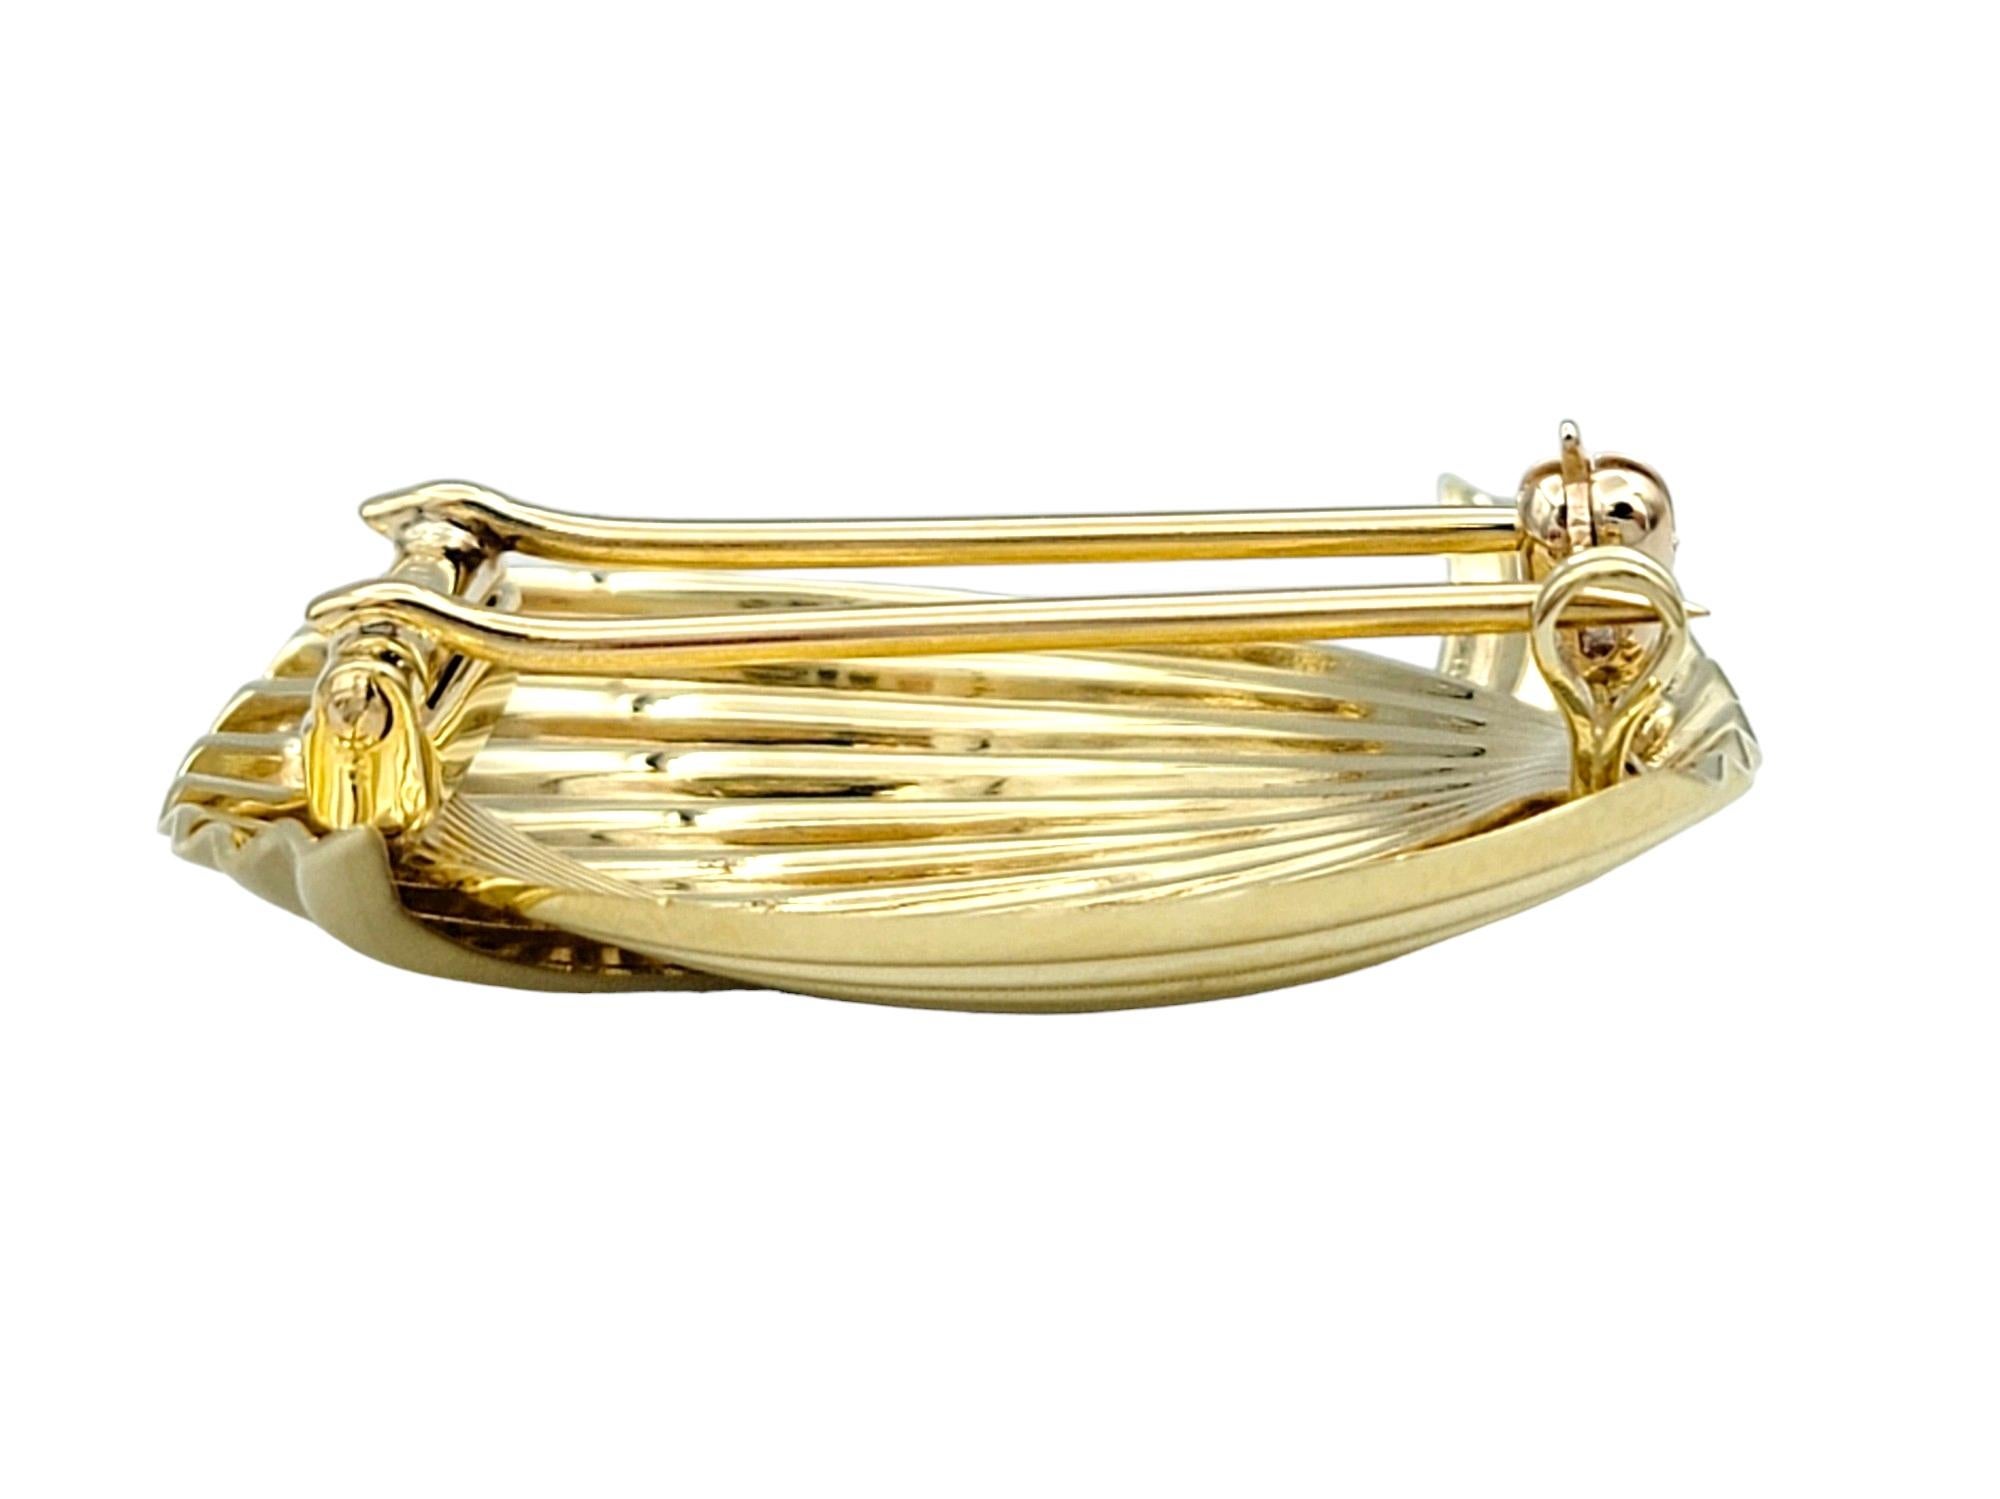 Contemporary Vintage Cartier Bypass Design Ridged Brooch Set in Polished 14 Karat Yellow Gold For Sale